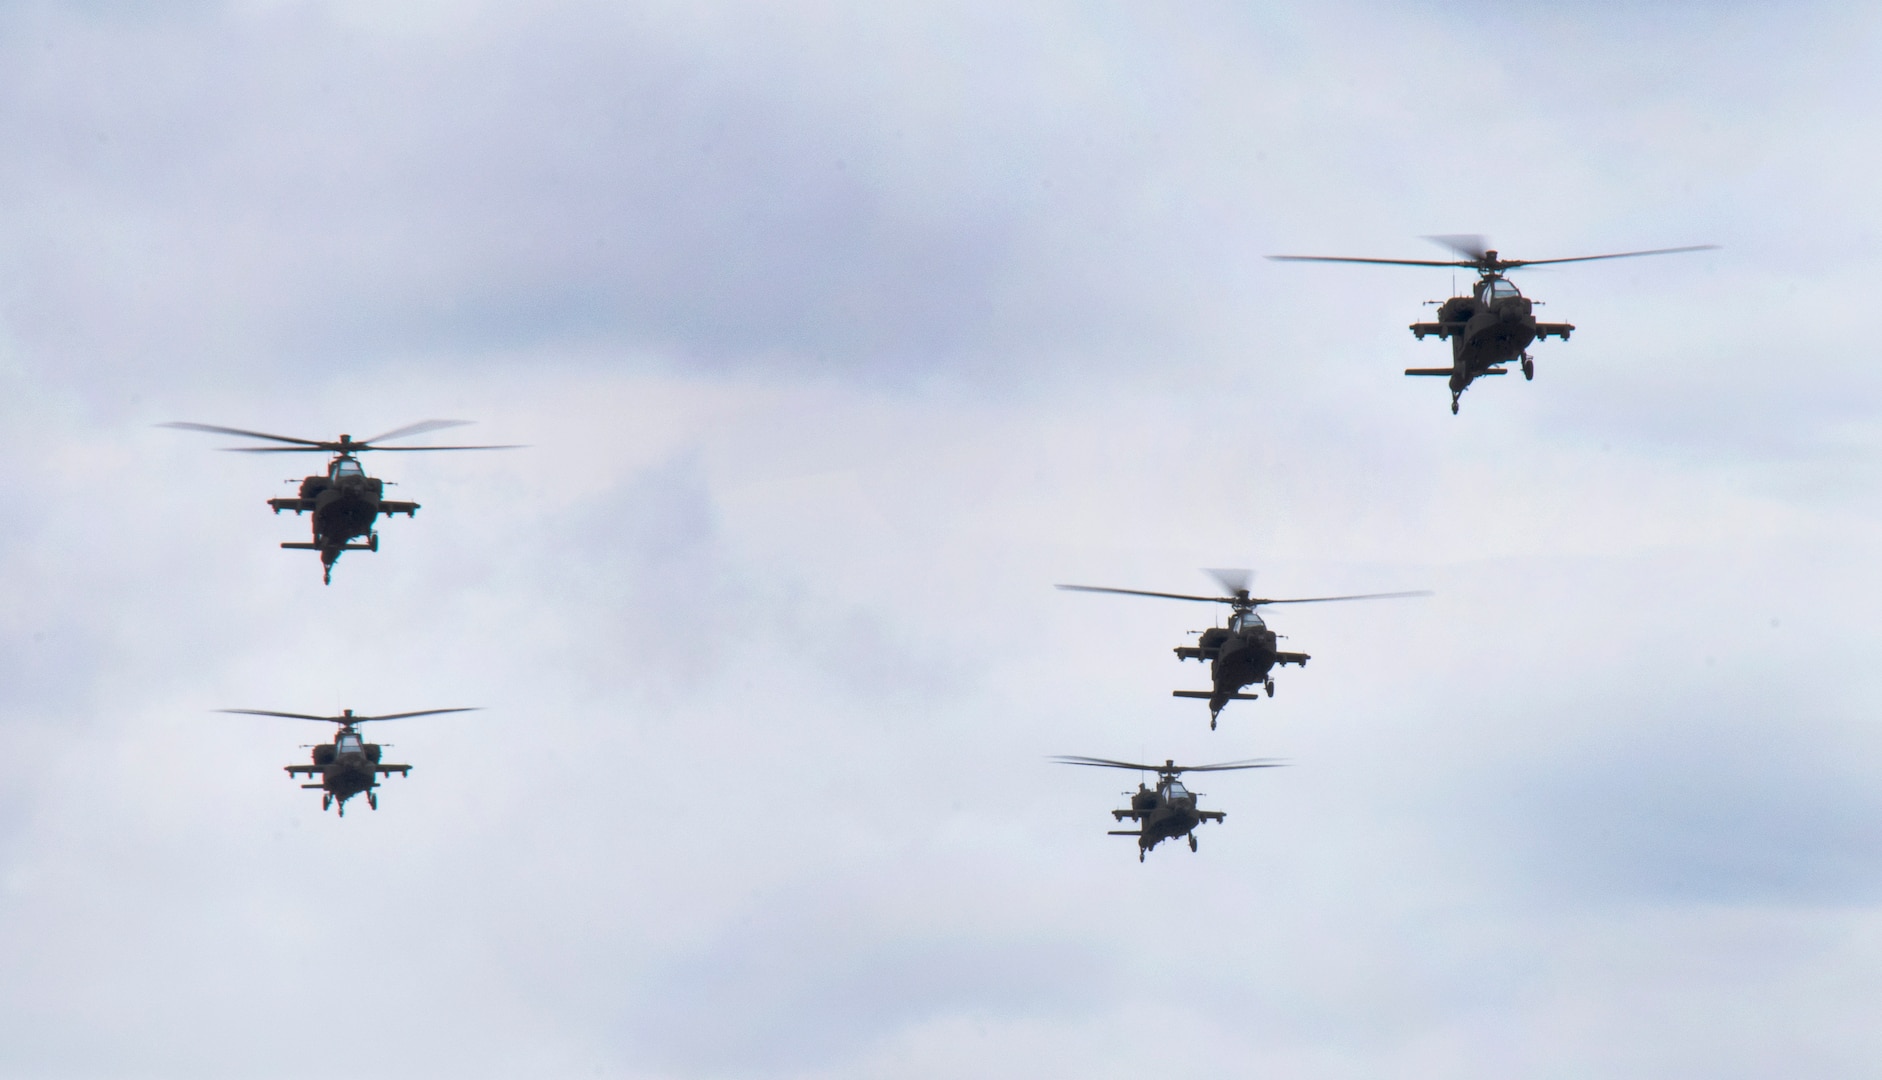 The first five AH-64E model Apache attack helicopters to be delivered to the South Carolina National Guard arrive at McEntire Joint National Guard Base, South Carolina, March 24, 2022. The South Carolina National Guard is replacing 24 D-model aircraft with the new E-model, which will be delivered to and flown by the 1-151st Attack Reconnaissance Battalion.